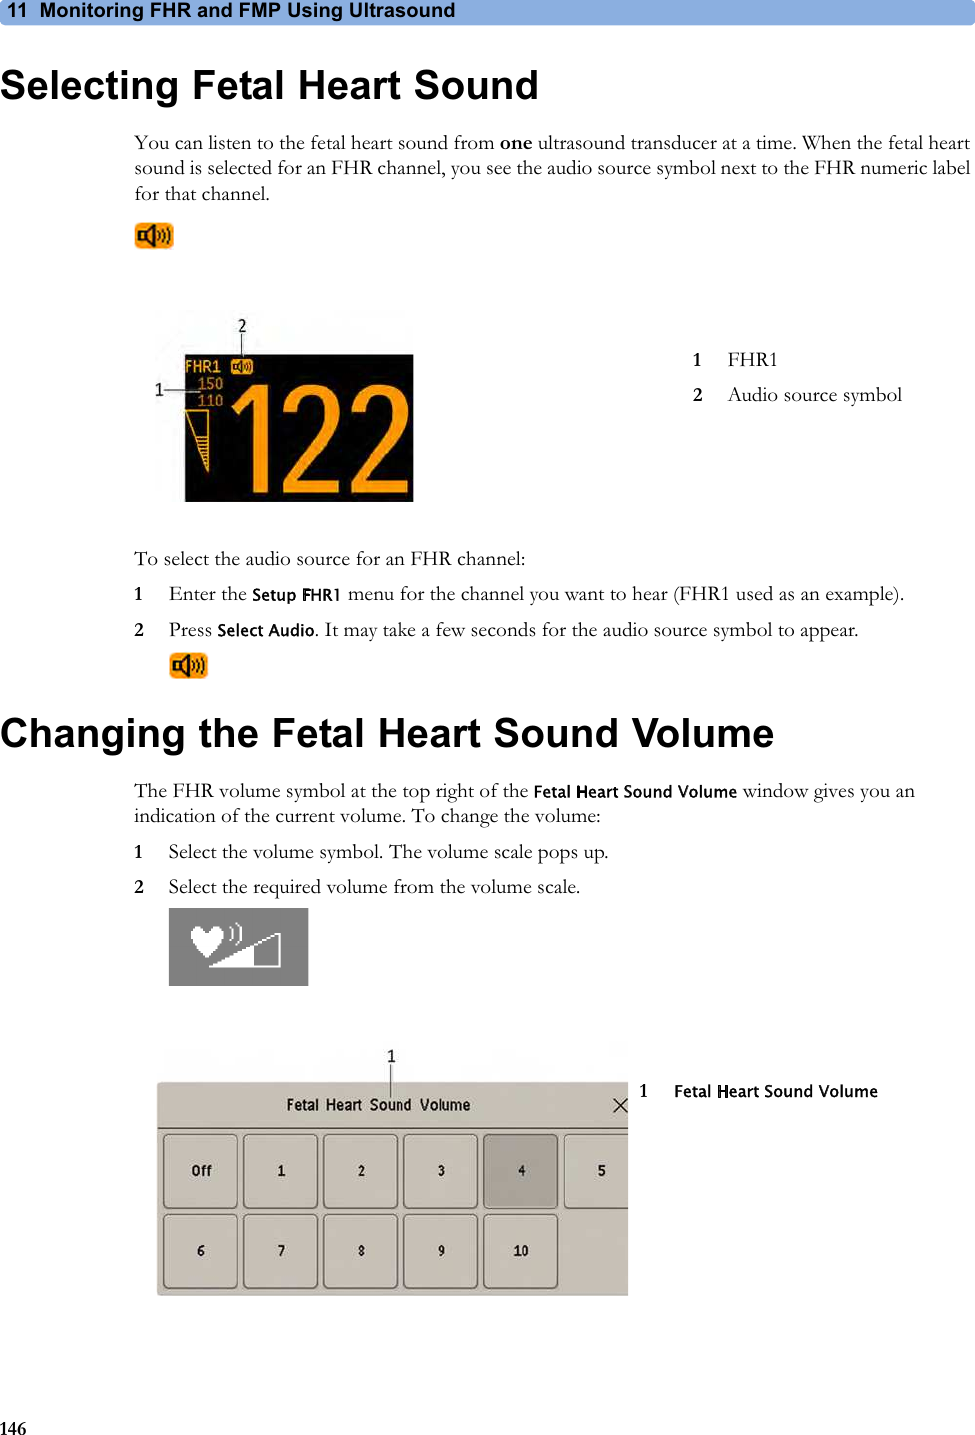 11  Monitoring FHR and FMP Using Ultrasound146Selecting Fetal Heart SoundYou can listen to the fetal heart sound from one ultrasound transducer at a time. When the fetal heart sound is selected for an FHR channel, you see the audio source symbol next to the FHR numeric label for that channel.To select the audio source for an FHR channel:1Enter the Setup FHR1 menu for the channel you want to hear (FHR1 used as an example).2Press Select Audio. It may take a few seconds for the audio source symbol to appear.Changing the Fetal Heart Sound VolumeThe FHR volume symbol at the top right of the Fetal Heart Sound Volume window gives you an indication of the current volume. To change the volume:1Select the volume symbol. The volume scale pops up.2Select the required volume from the volume scale.1FHR12Audio source symbol1Fetal Heart Sound Volume